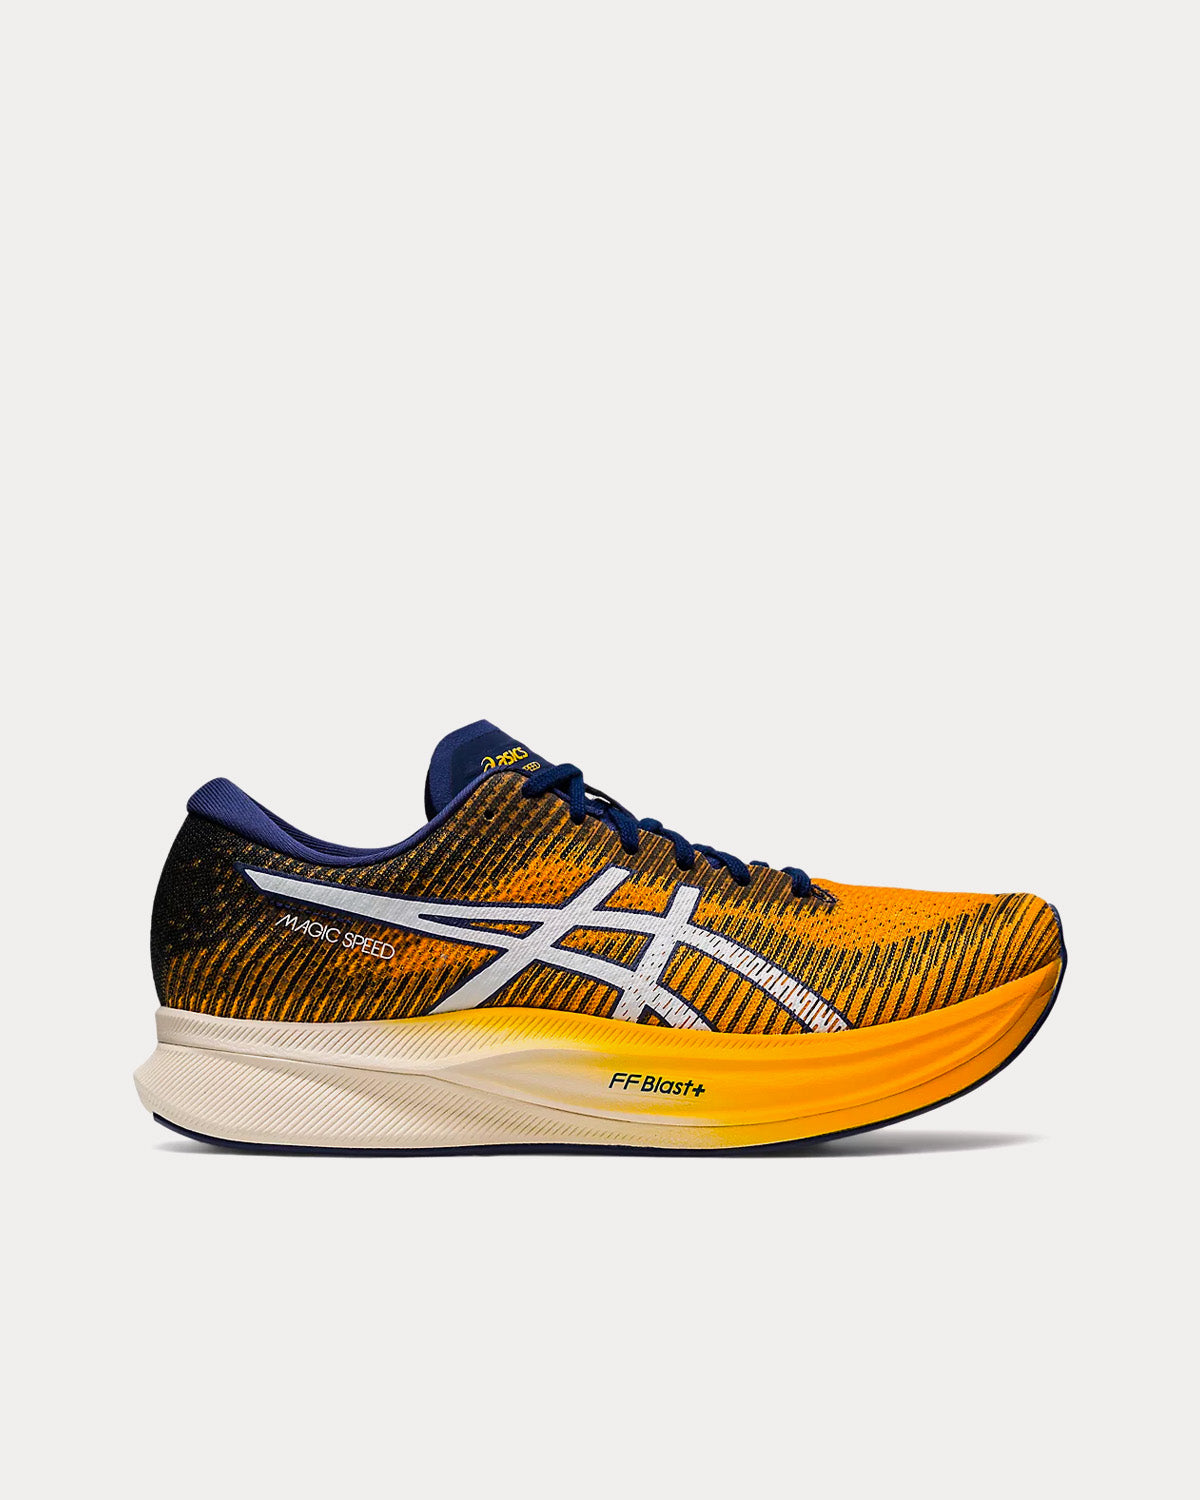 Men's MAGIC SPEED 2, Safety Yellow/White, Running Shoes